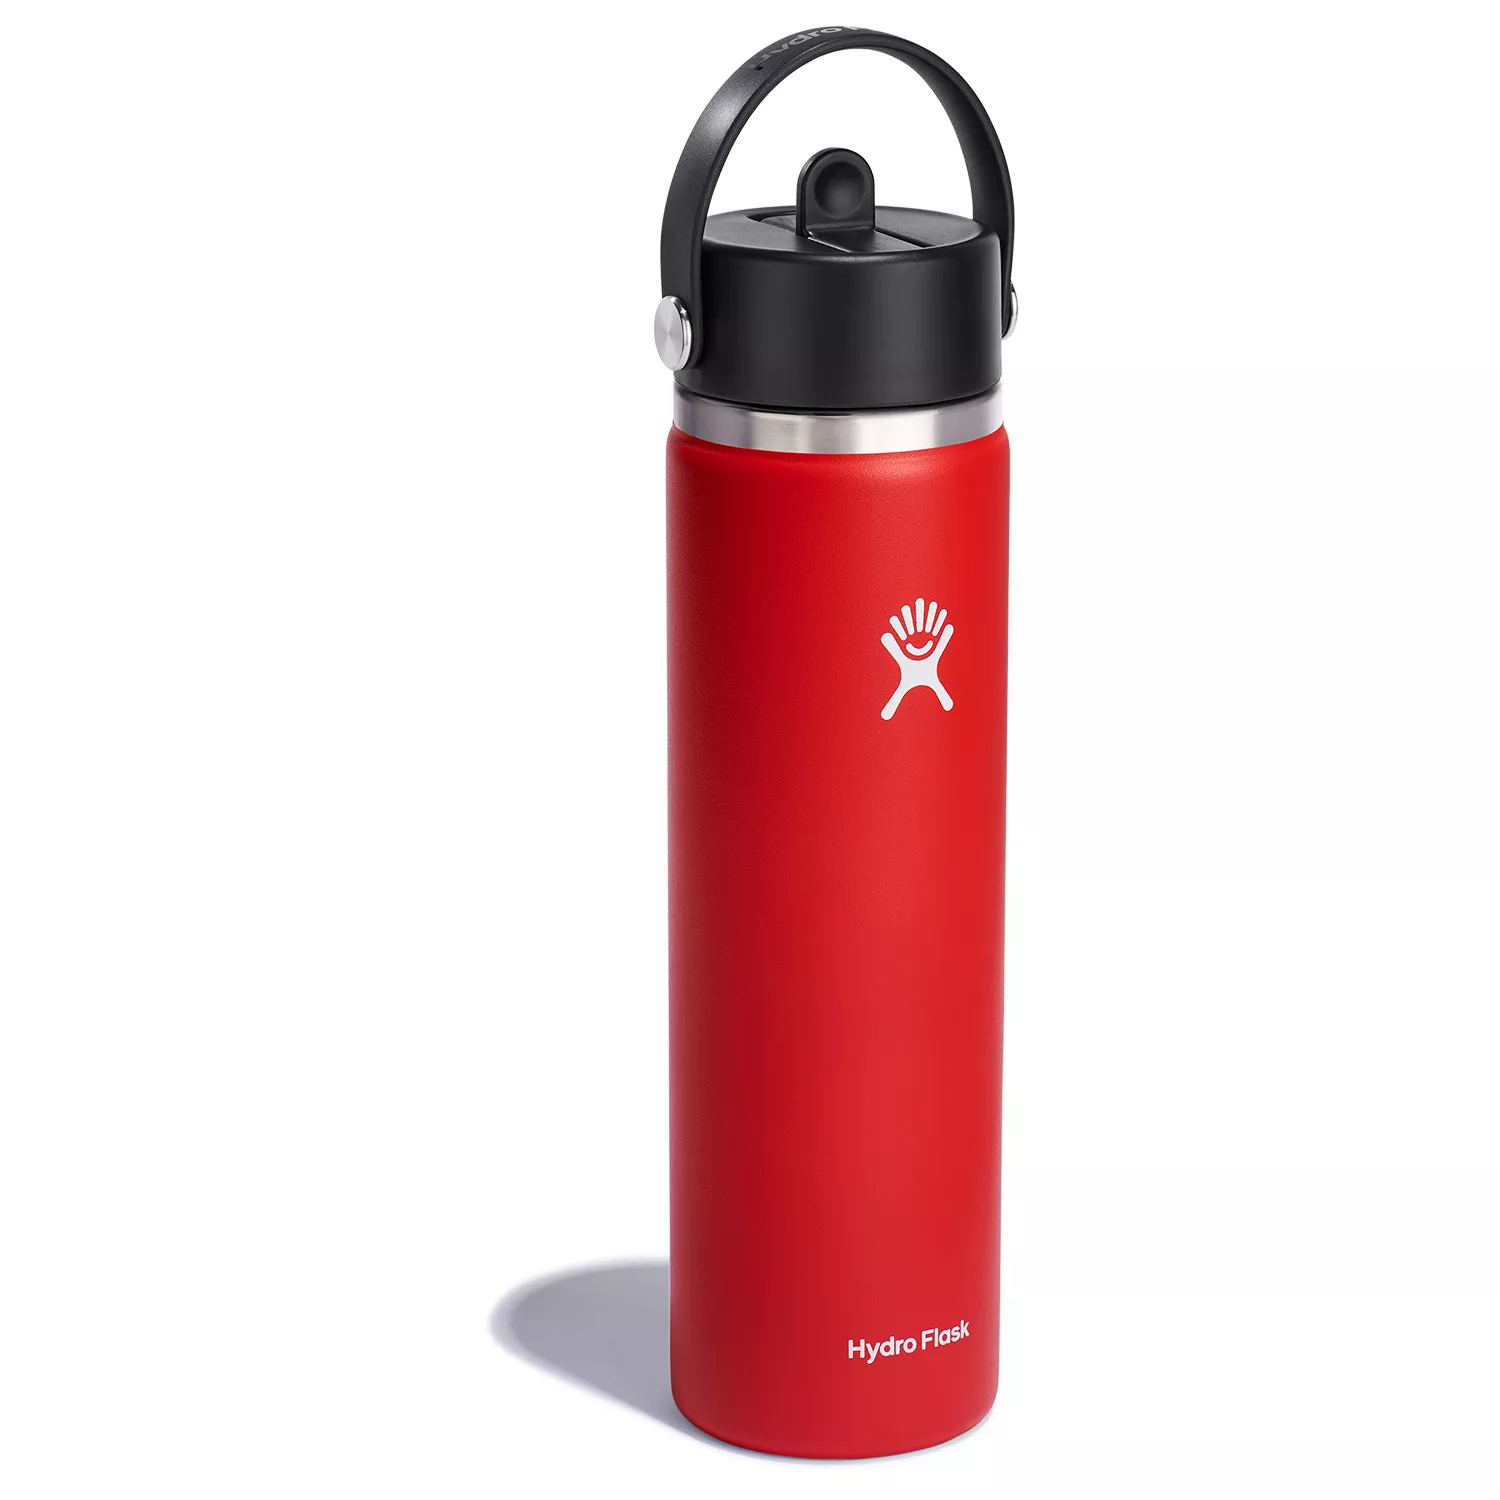 The Hydro Flask Tumbler Is on Sale for Cyber Monday